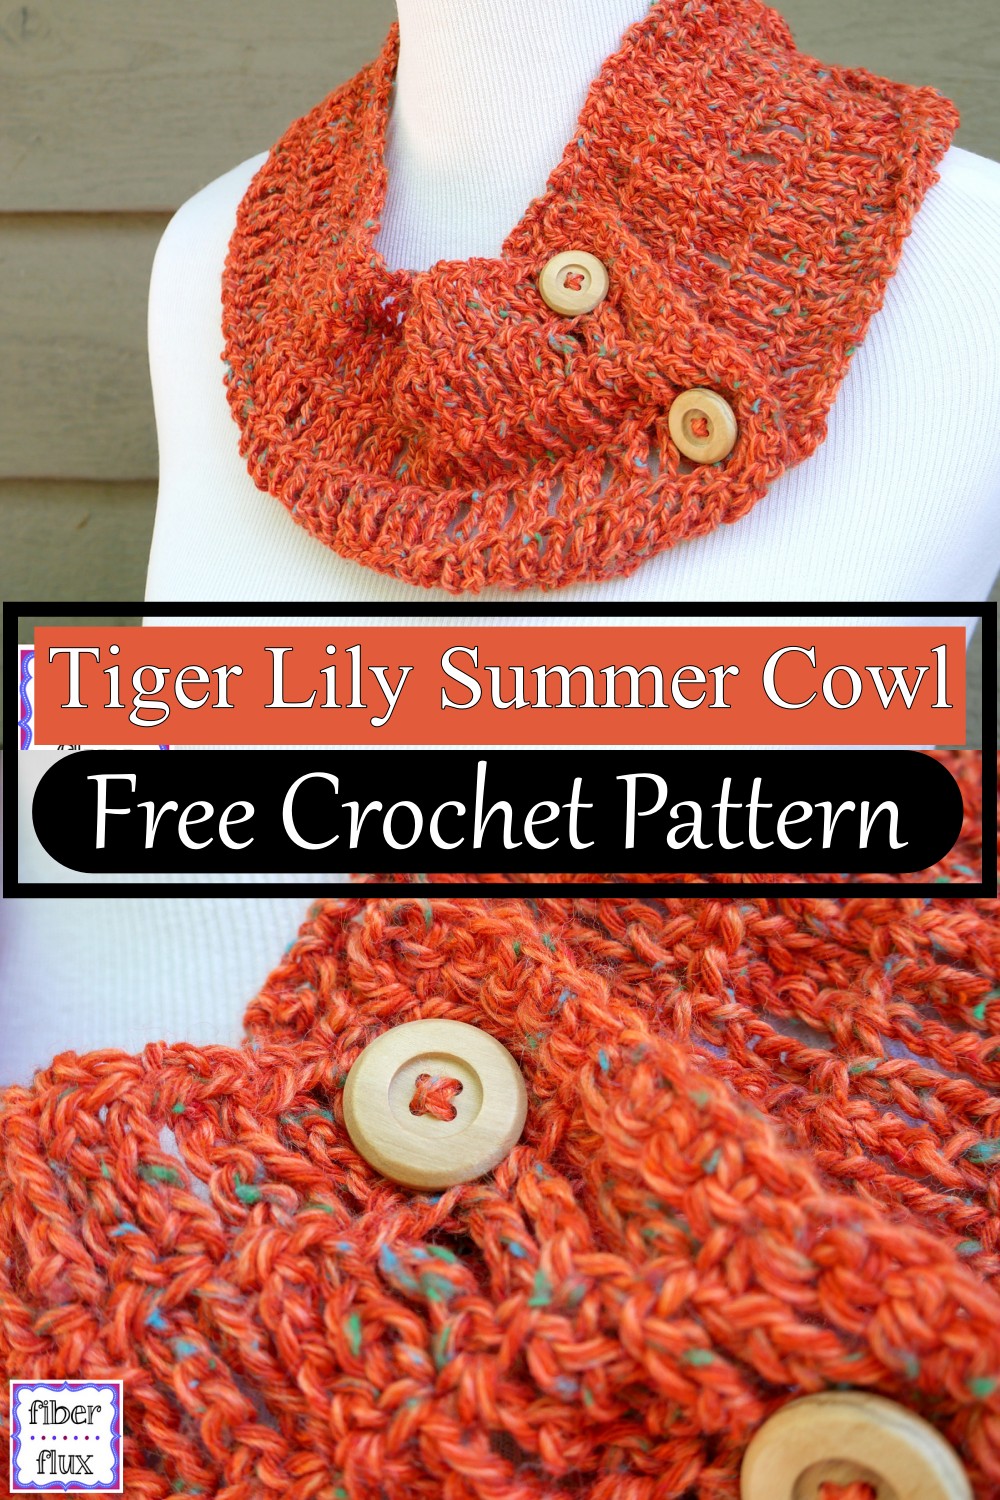 Tiger Lily Summer Cowl